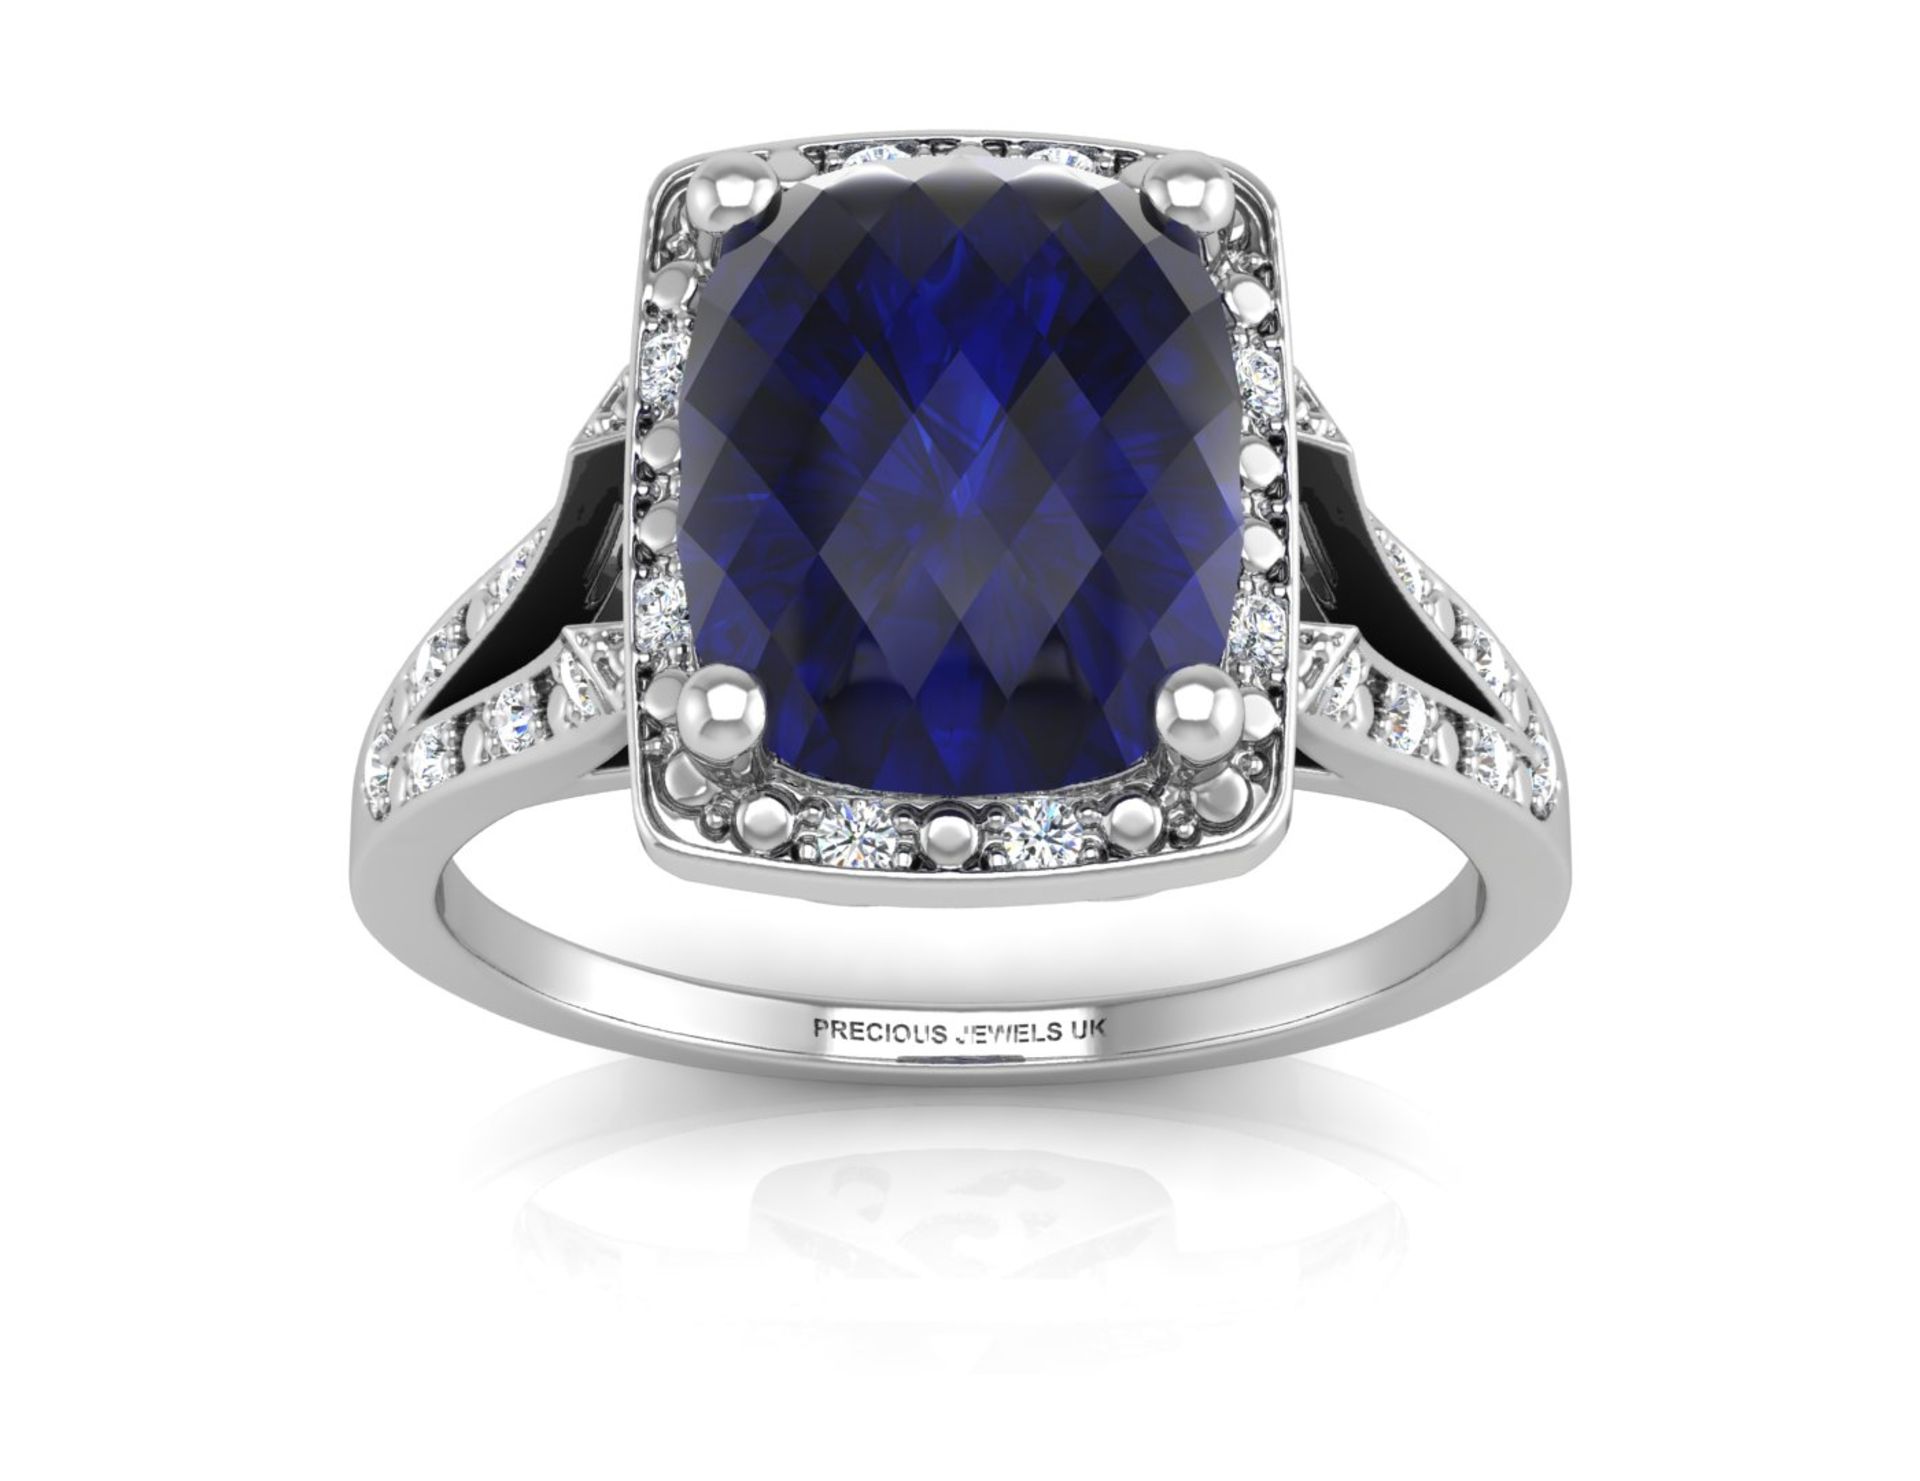 9ct White Gold Cushion Cluster Diamond And Created Ceylon Sapphire Ring 0.11 - Image 3 of 5